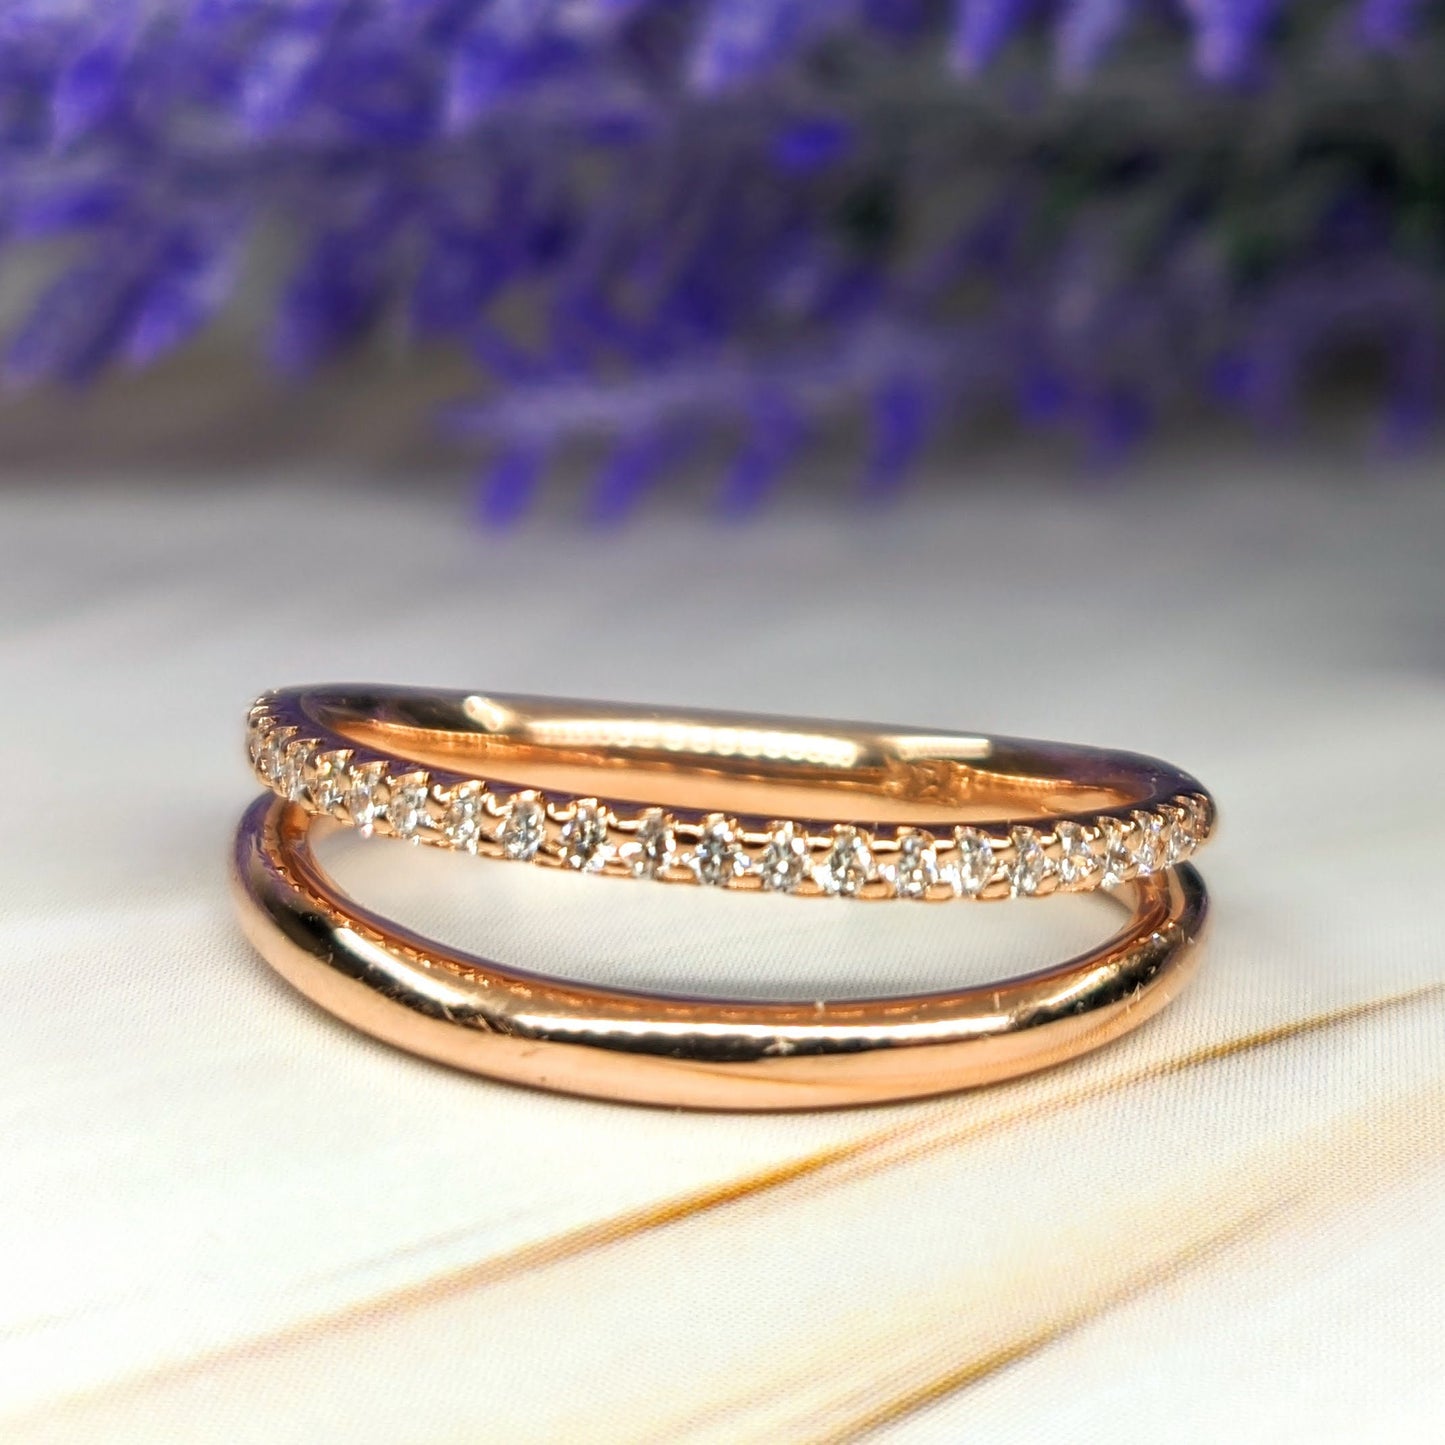 Double Stacking Ring/Double Band  100% Natural Diamond Ring/14K Solid Gold Unique Diamond Ring/Anniversary Gift/ Unique Gold Diamond Ring